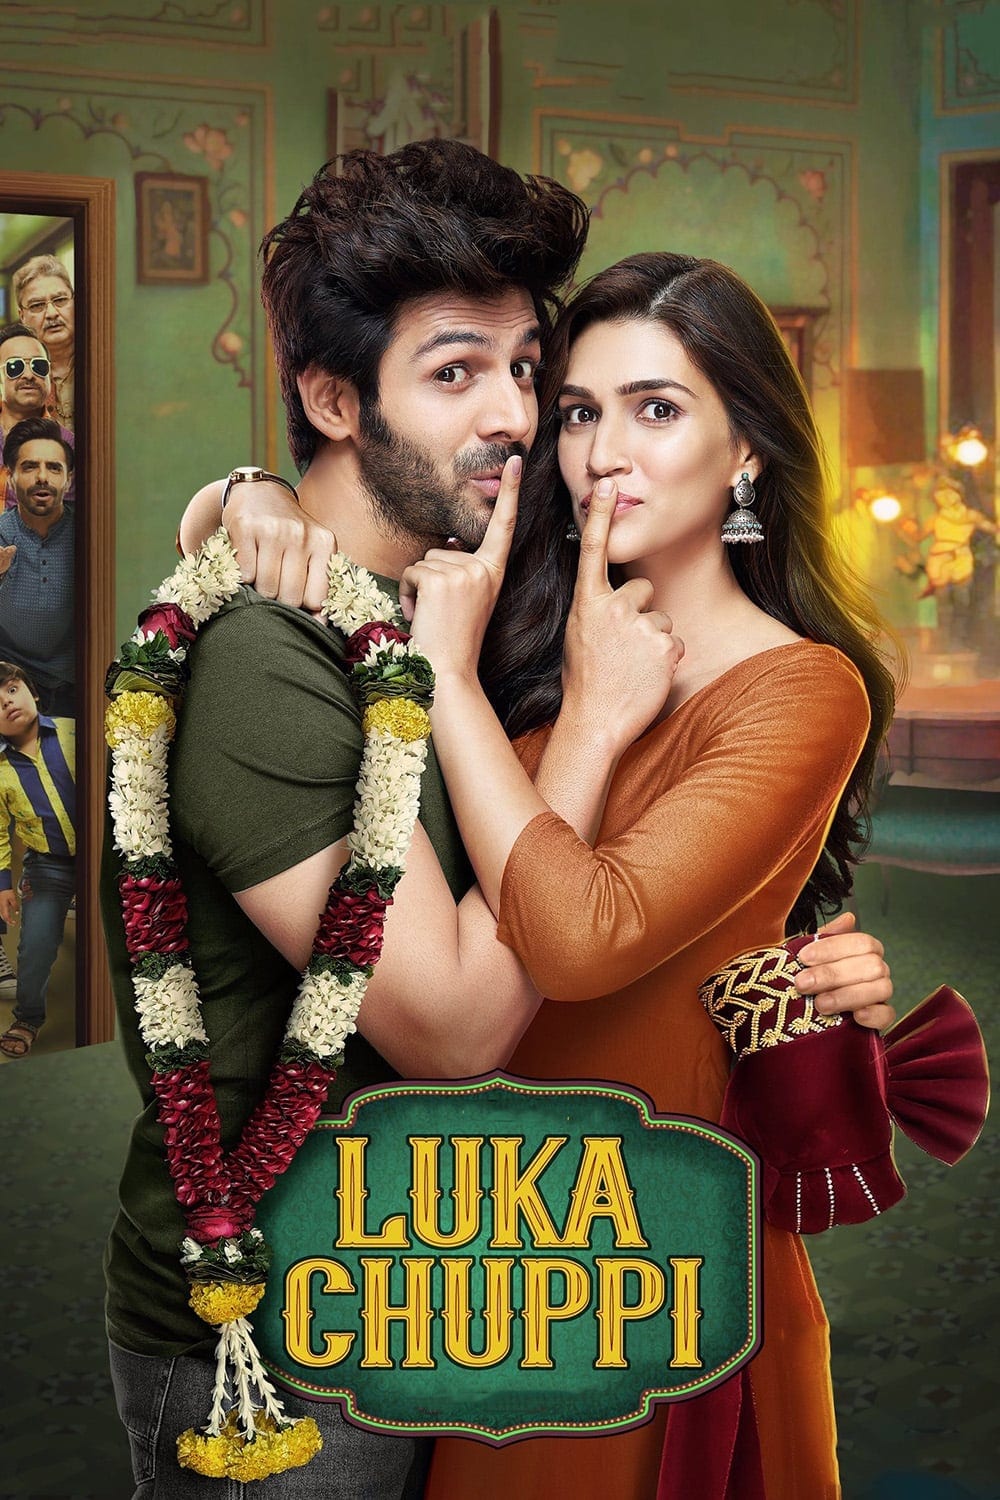 Poster for the movie "Luka Chuppi"